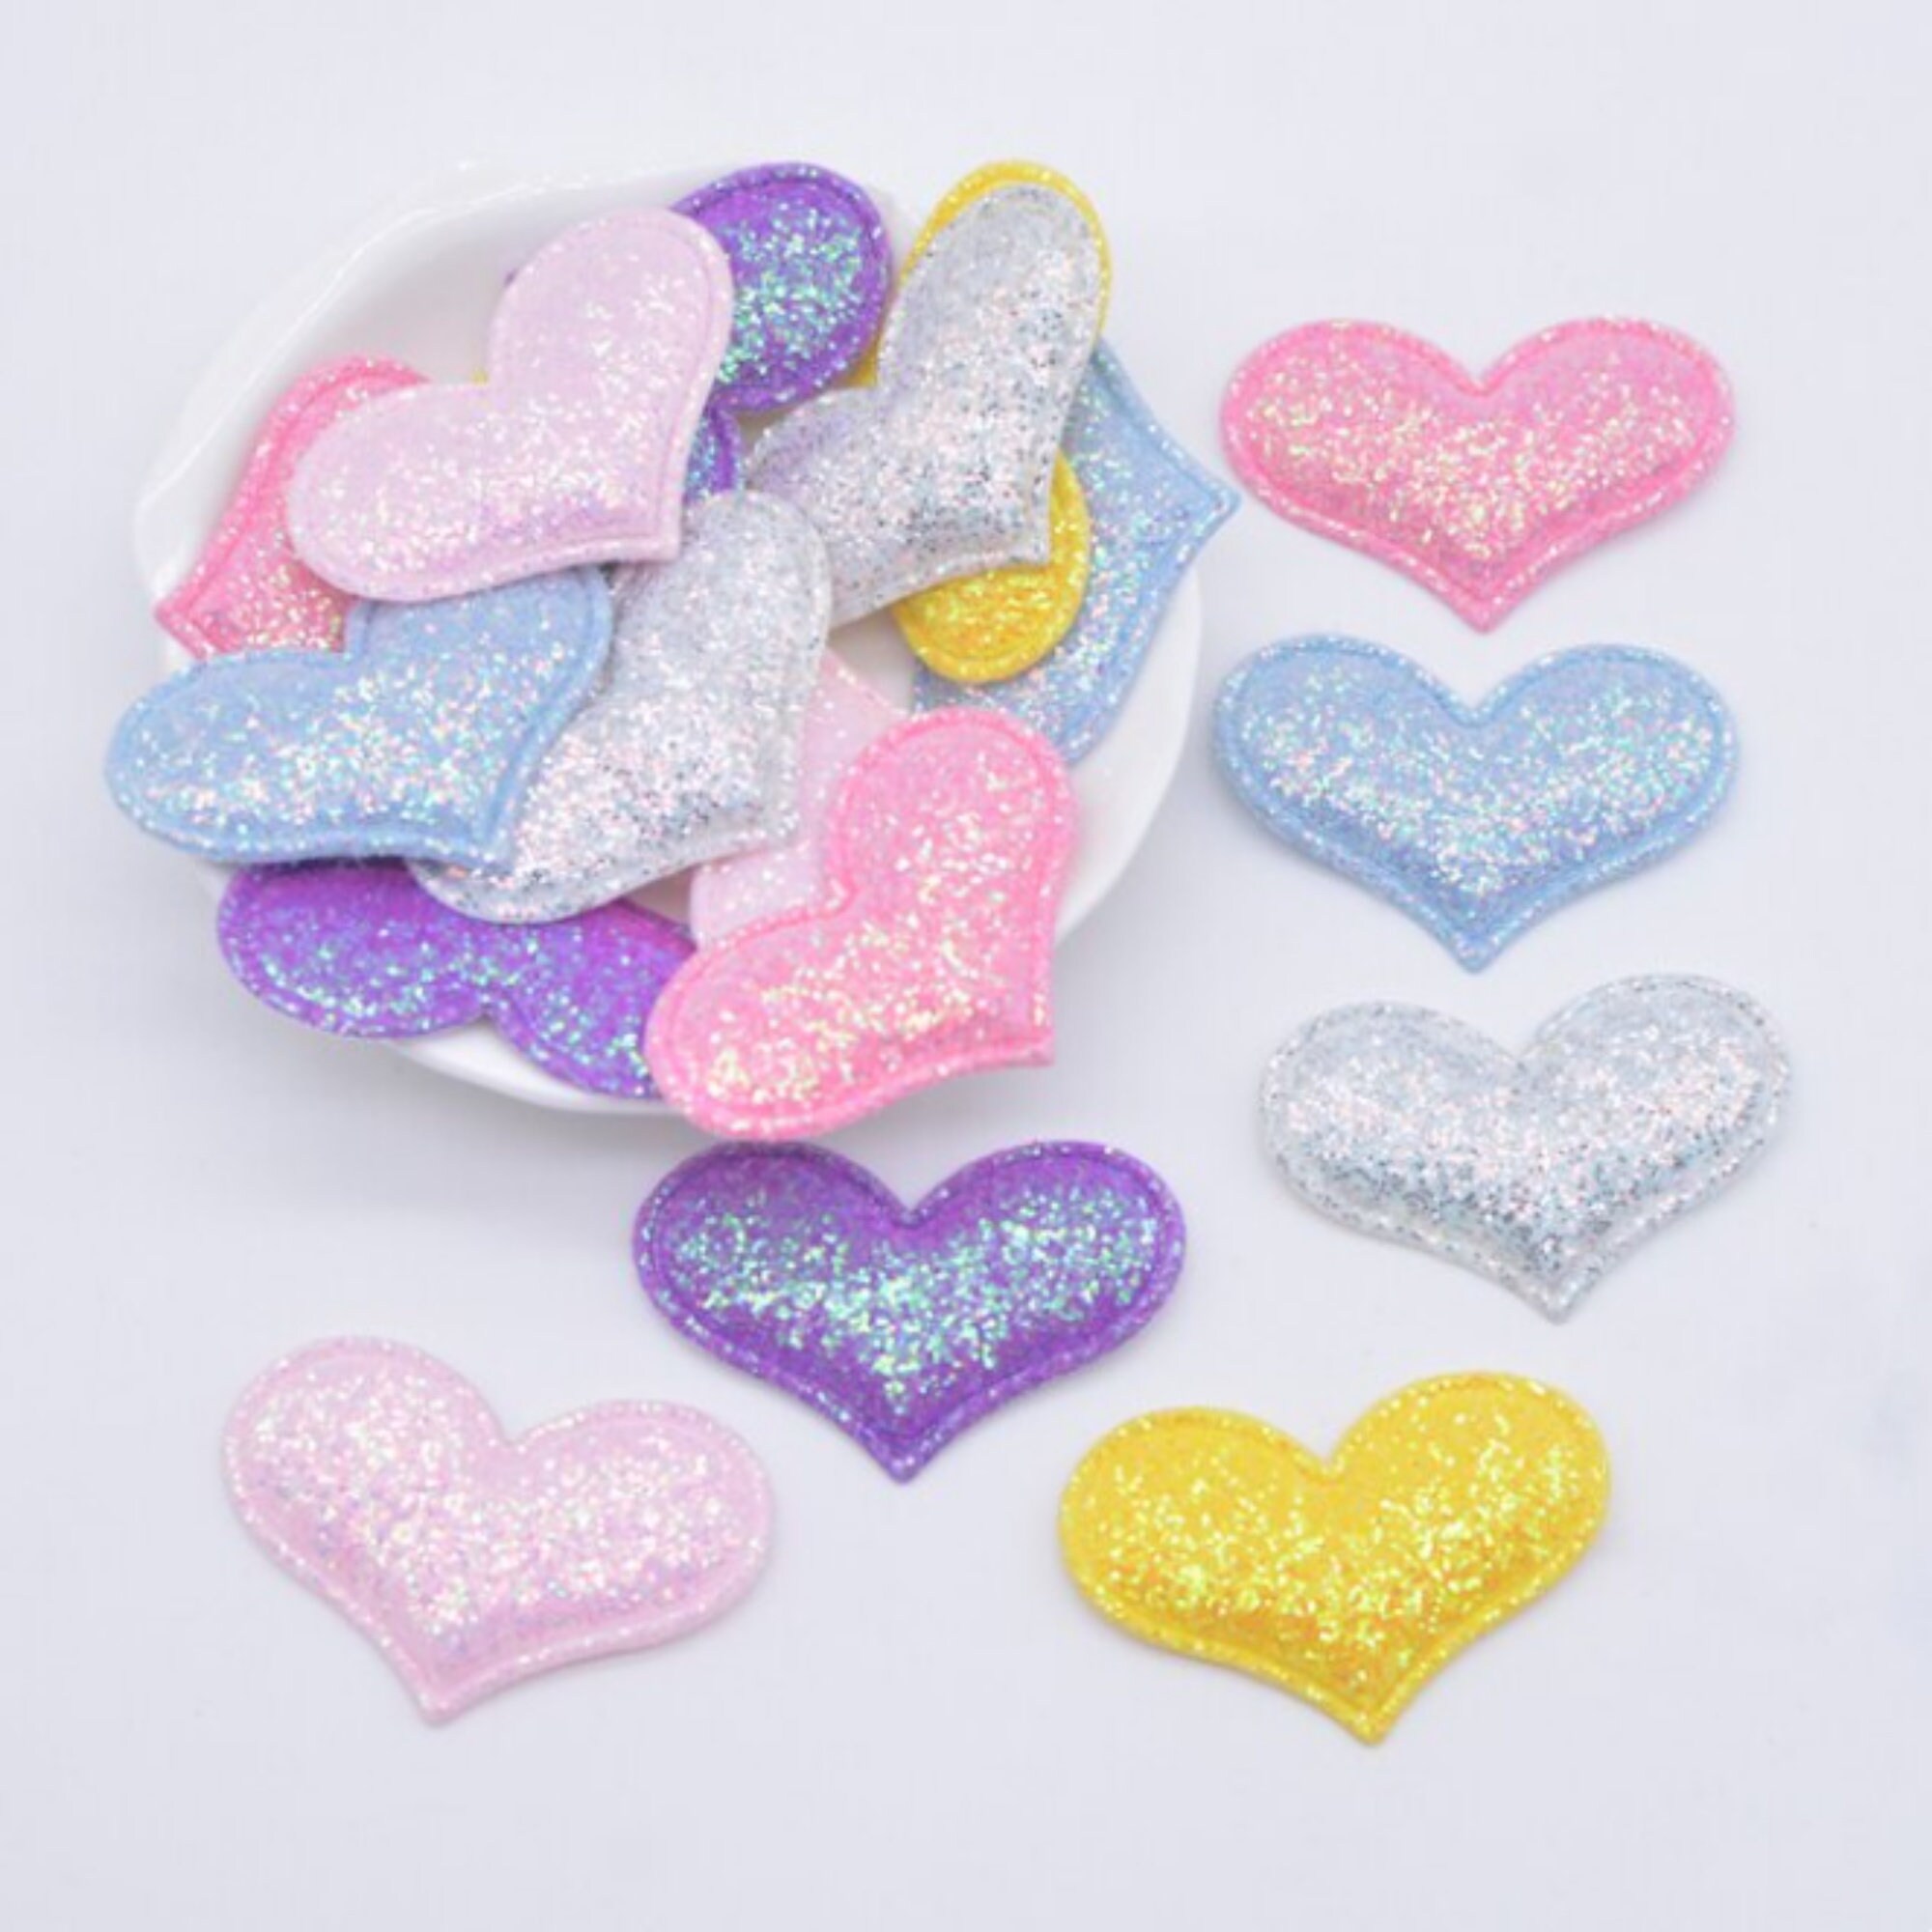 Heart Iron-on Patch, Embroidered Heart Applique, Decorative Heart Patches 